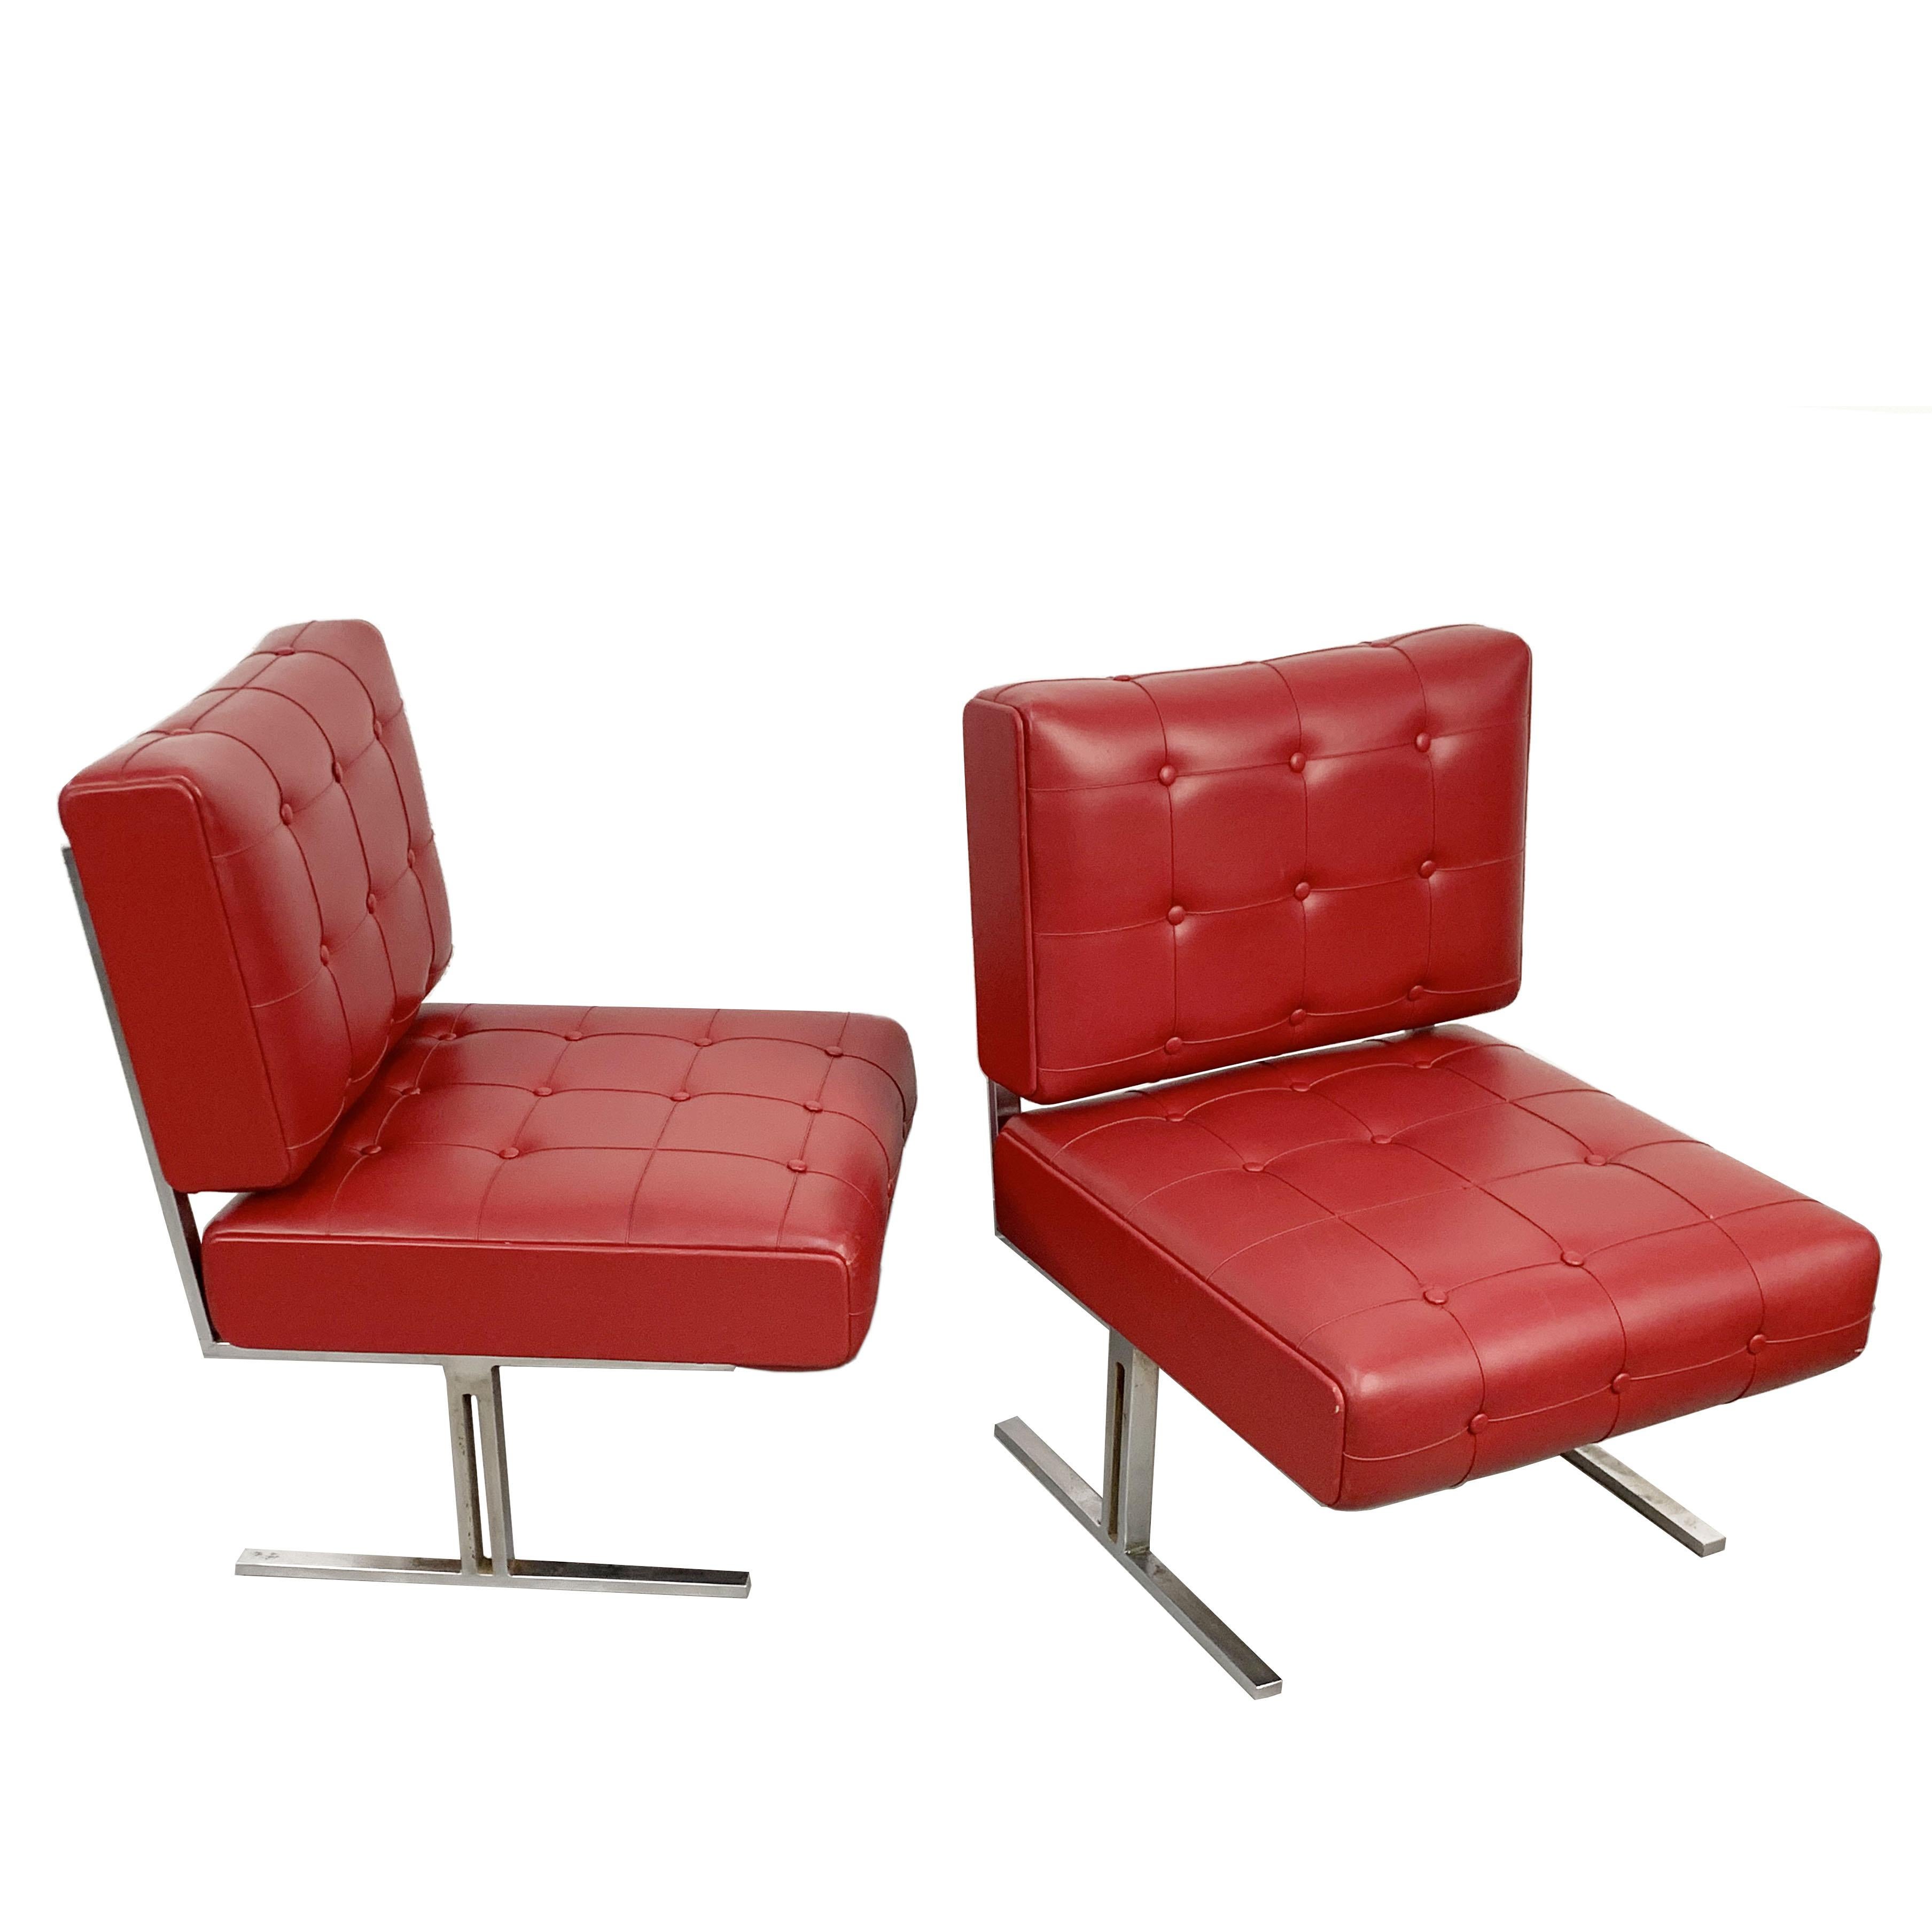 Rare red vintage leatherette lounge chairs in the style of Robert Haussmann for De Sede. 

Hand-built in Italy during the 1950s, these rare armchairs have a chromed steel frame and red faux leather, capitonne, cushions.

The conditions are